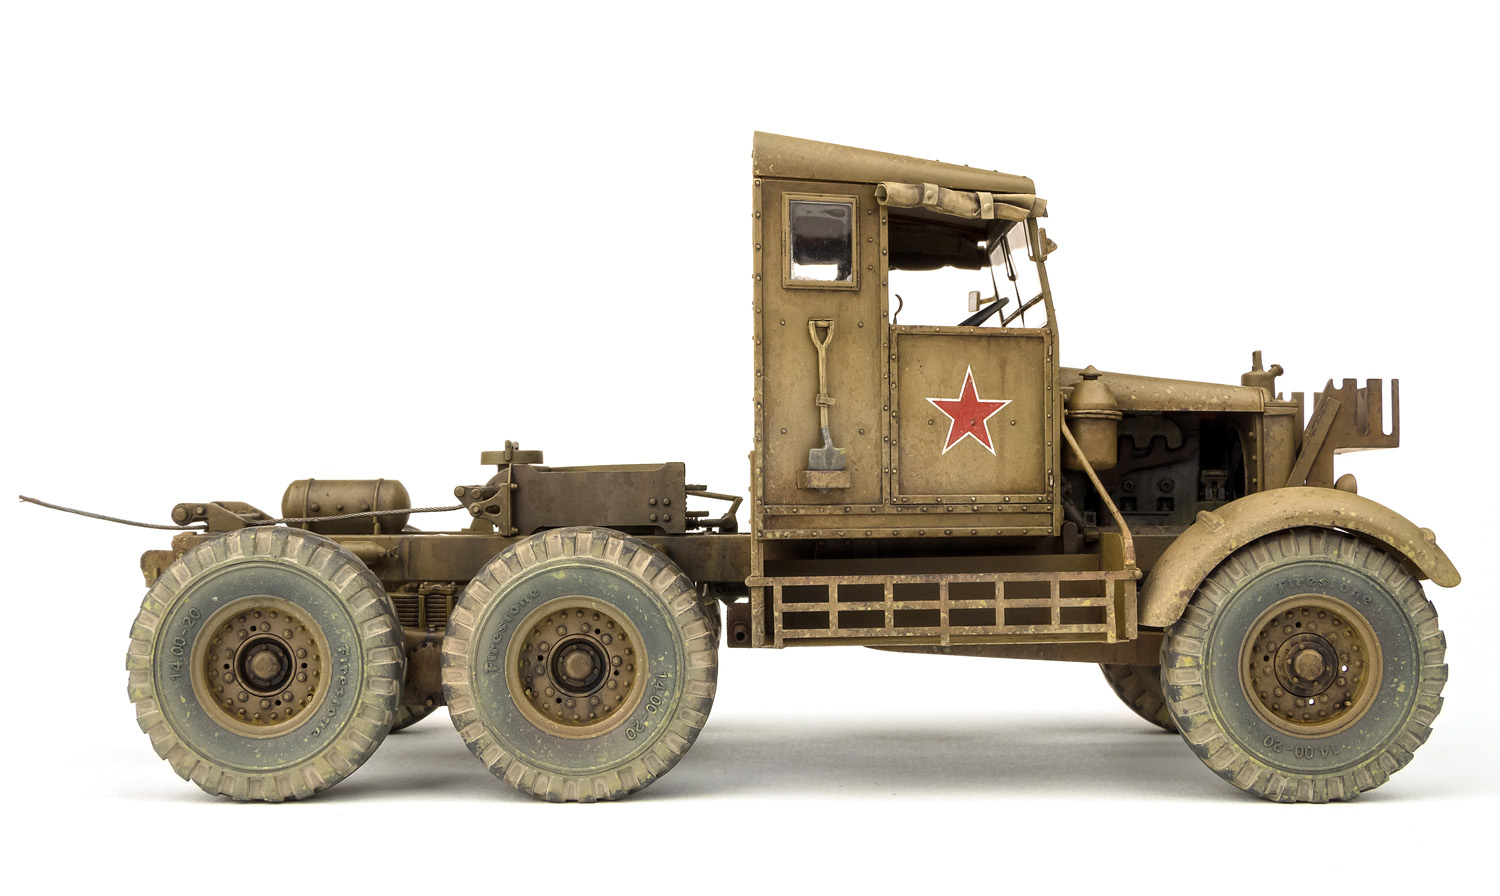 Build Guide Pt III: Andy's 35th scale IBG Models Scammell Pioneer SV2S...